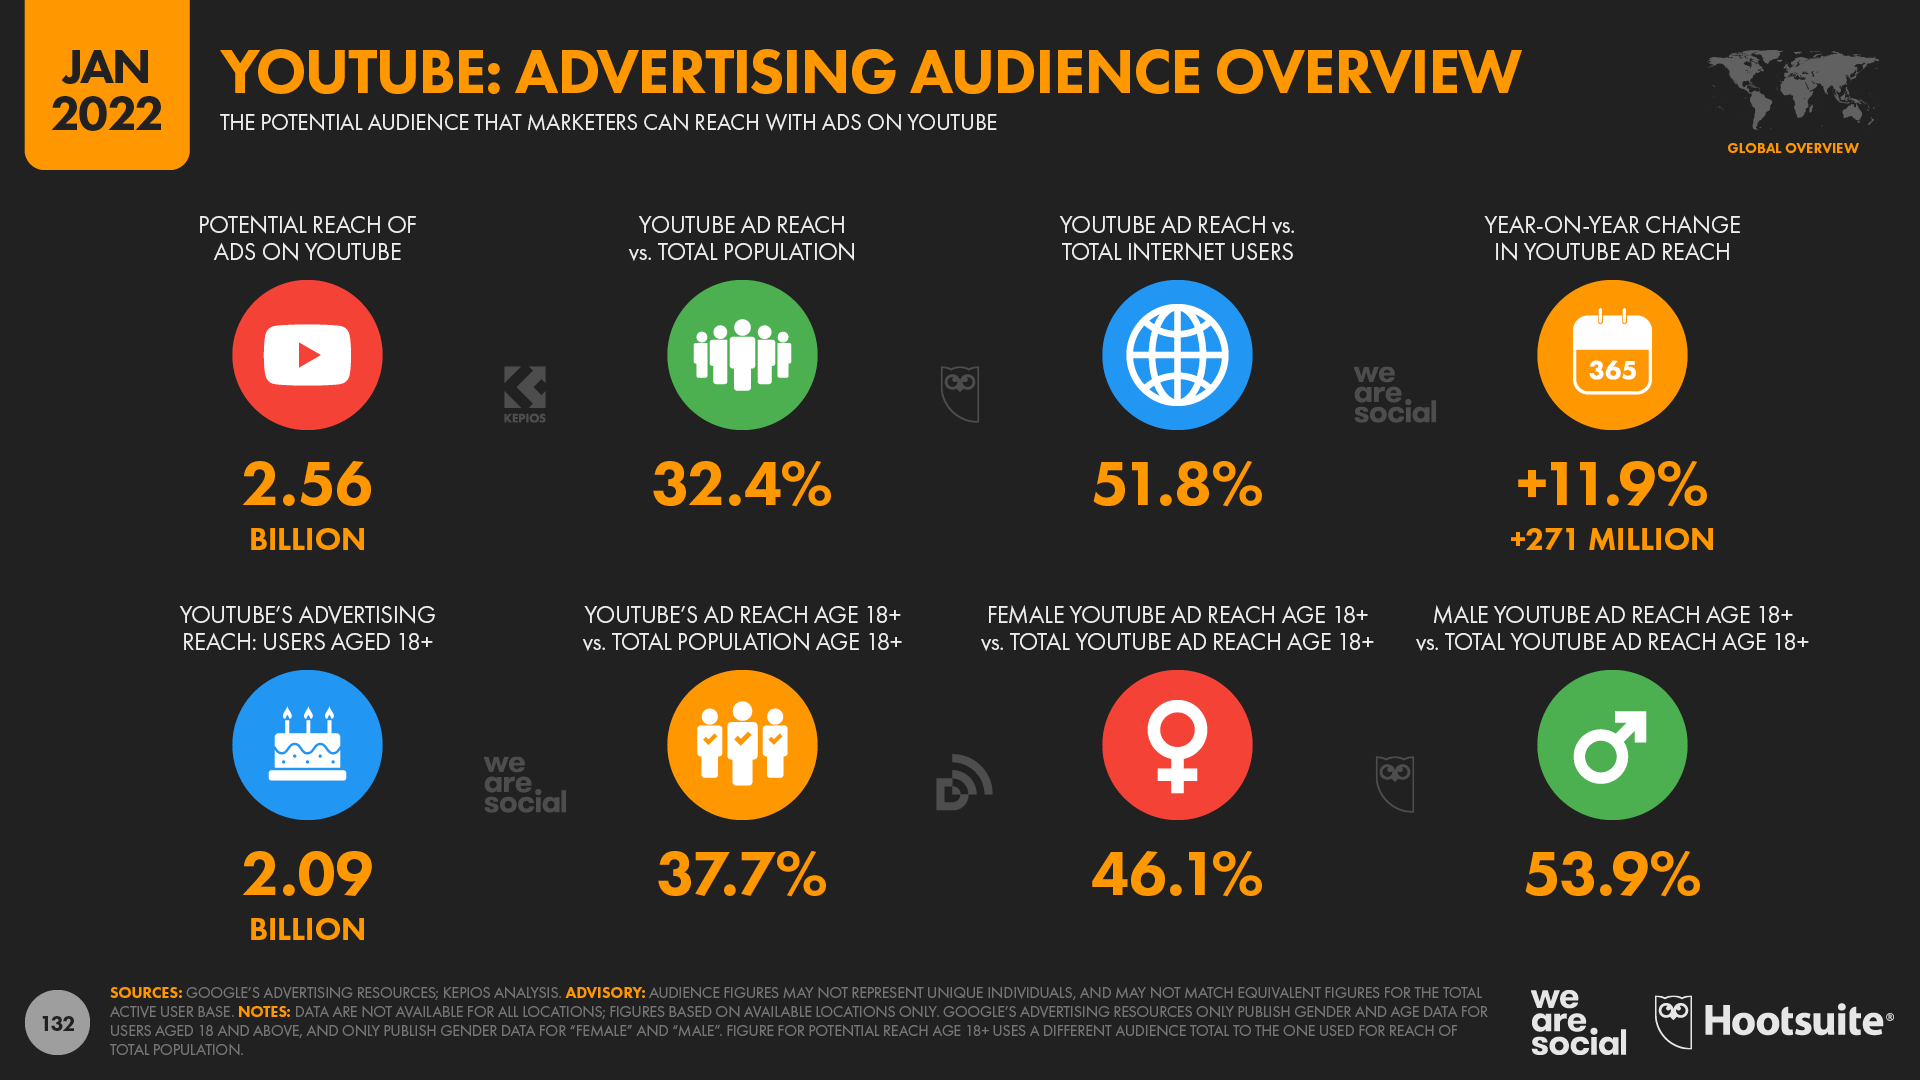 chart showing YouTube advertising audience overview